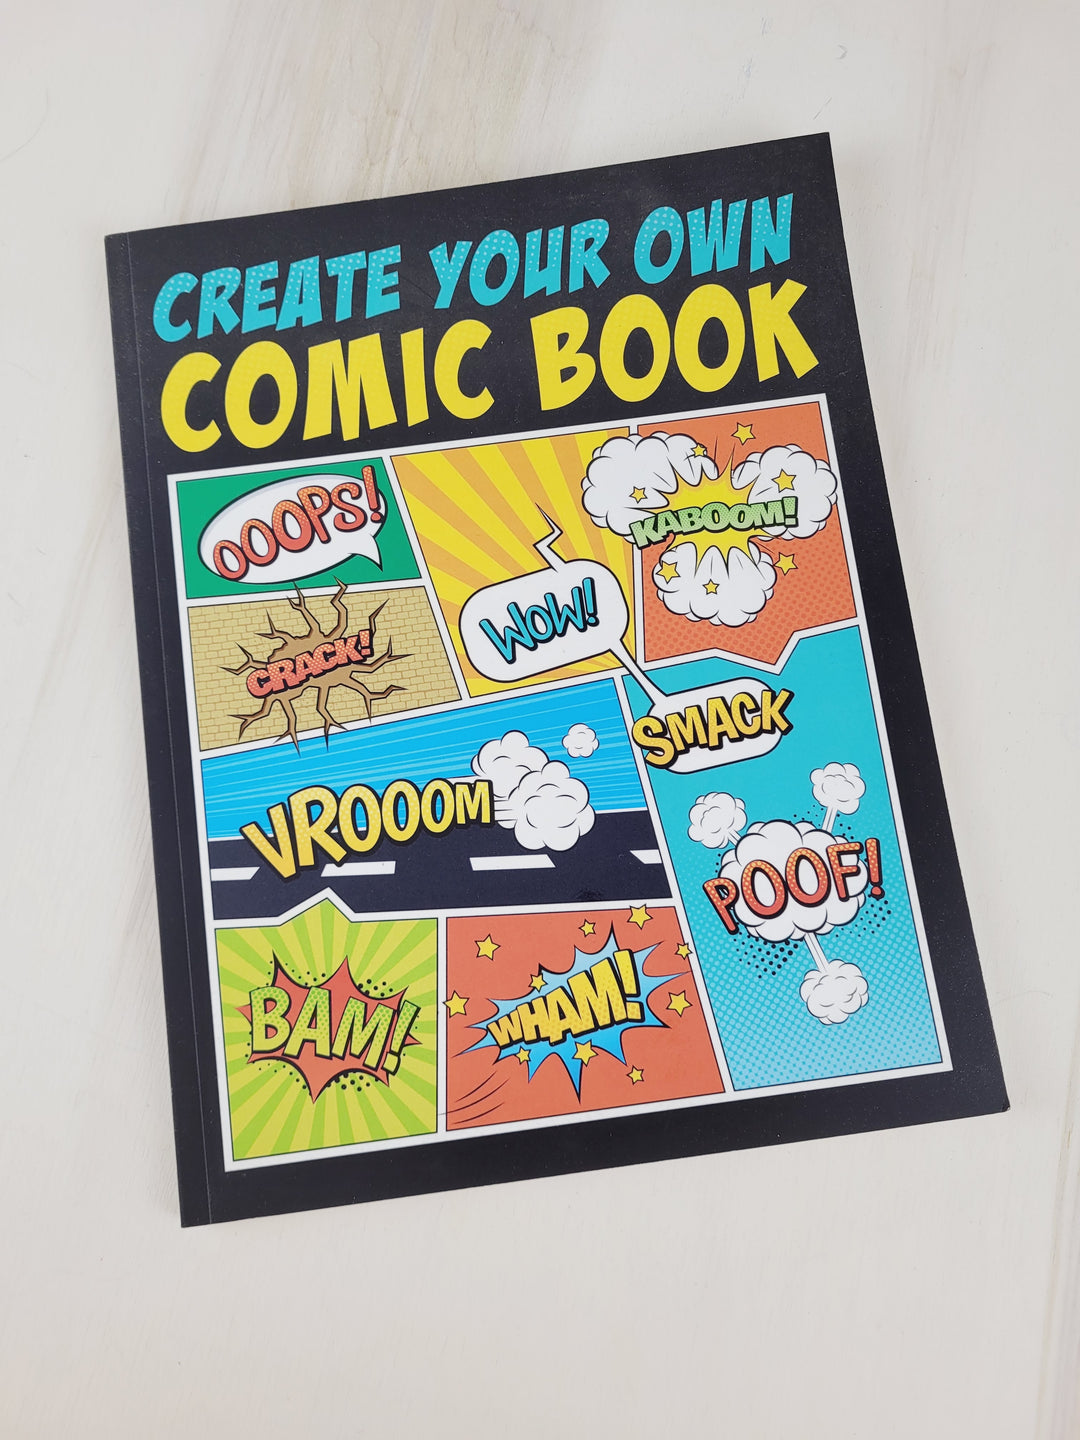 CREATE YOUR OWN COMIC BOOK NEW!